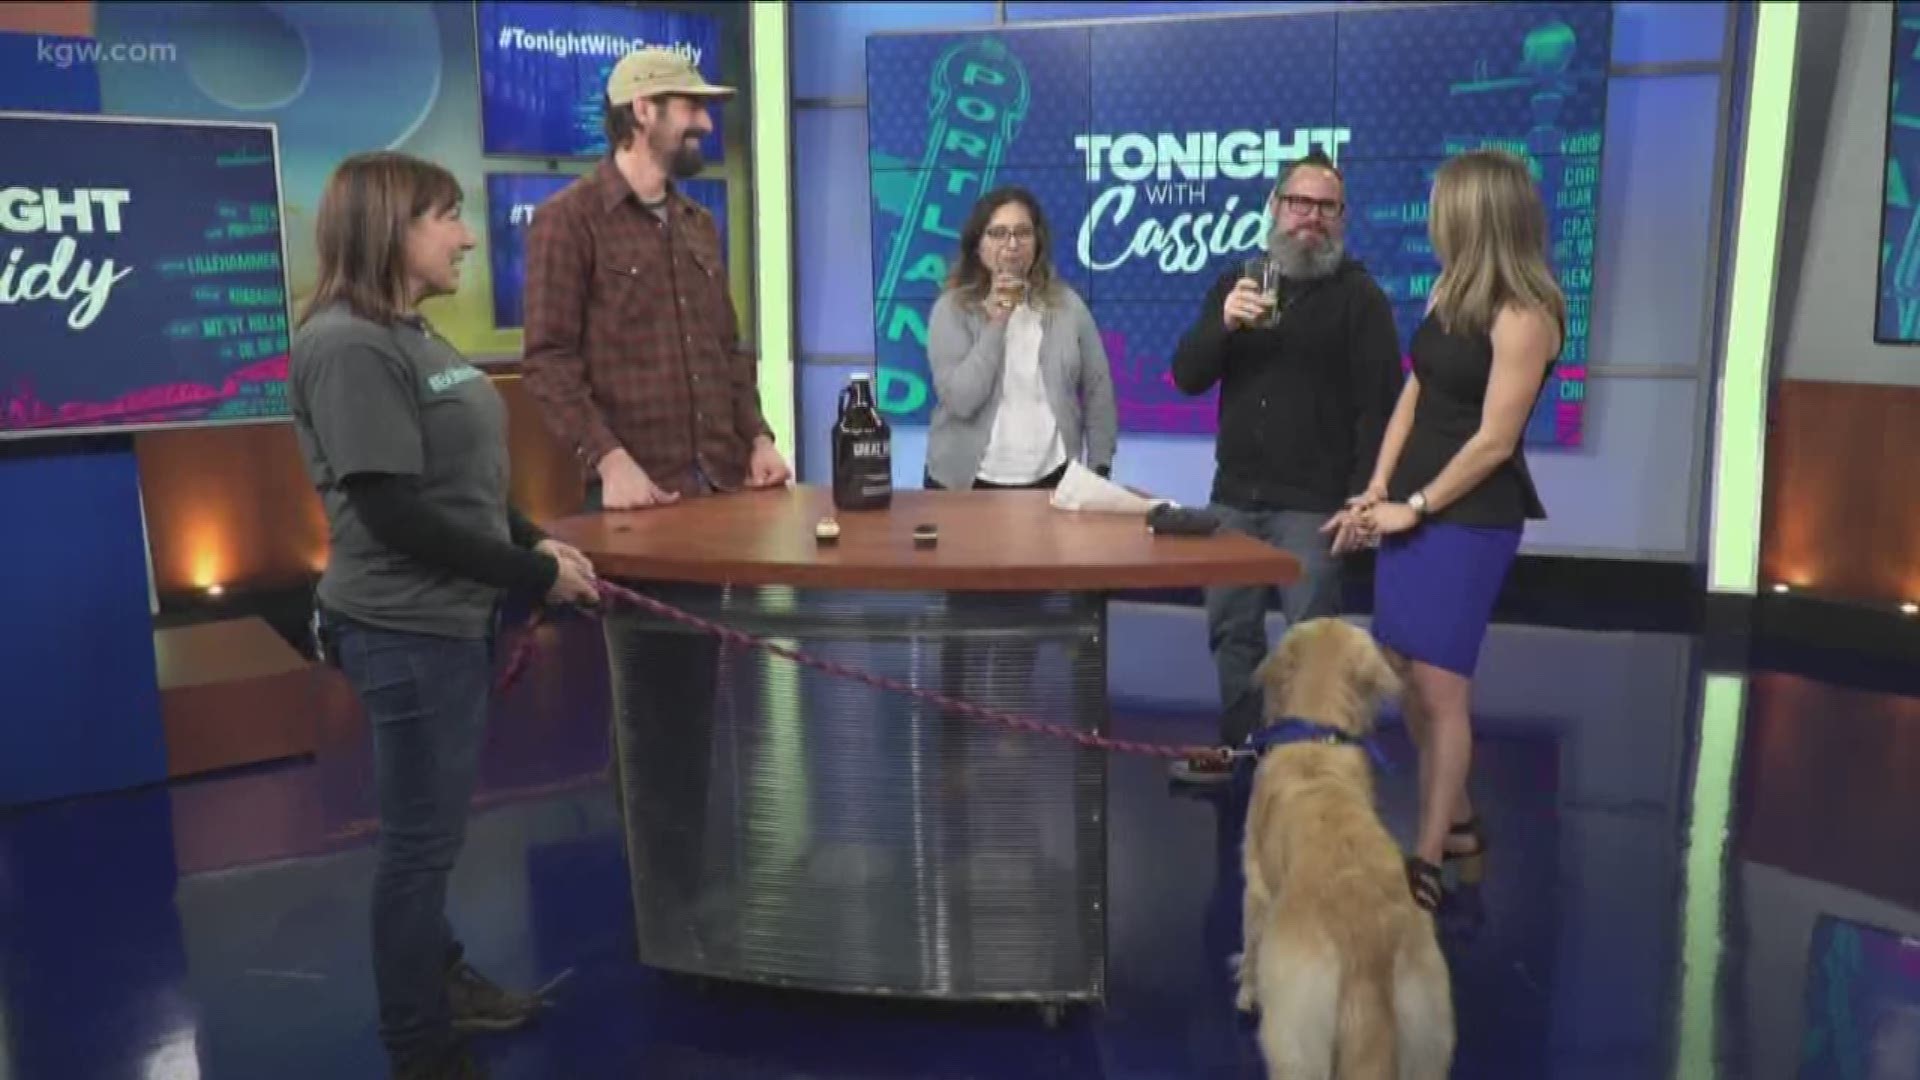 Migration Brewing created the Take Paws Lager to celebrate the 150th anniversary of the Oregon Humane Society. On Saturday Nov. 17th head to the Oregon Humane Society to celebrate at their birthday party.

oregonhumanesociety.org

#TonightwithCassidy